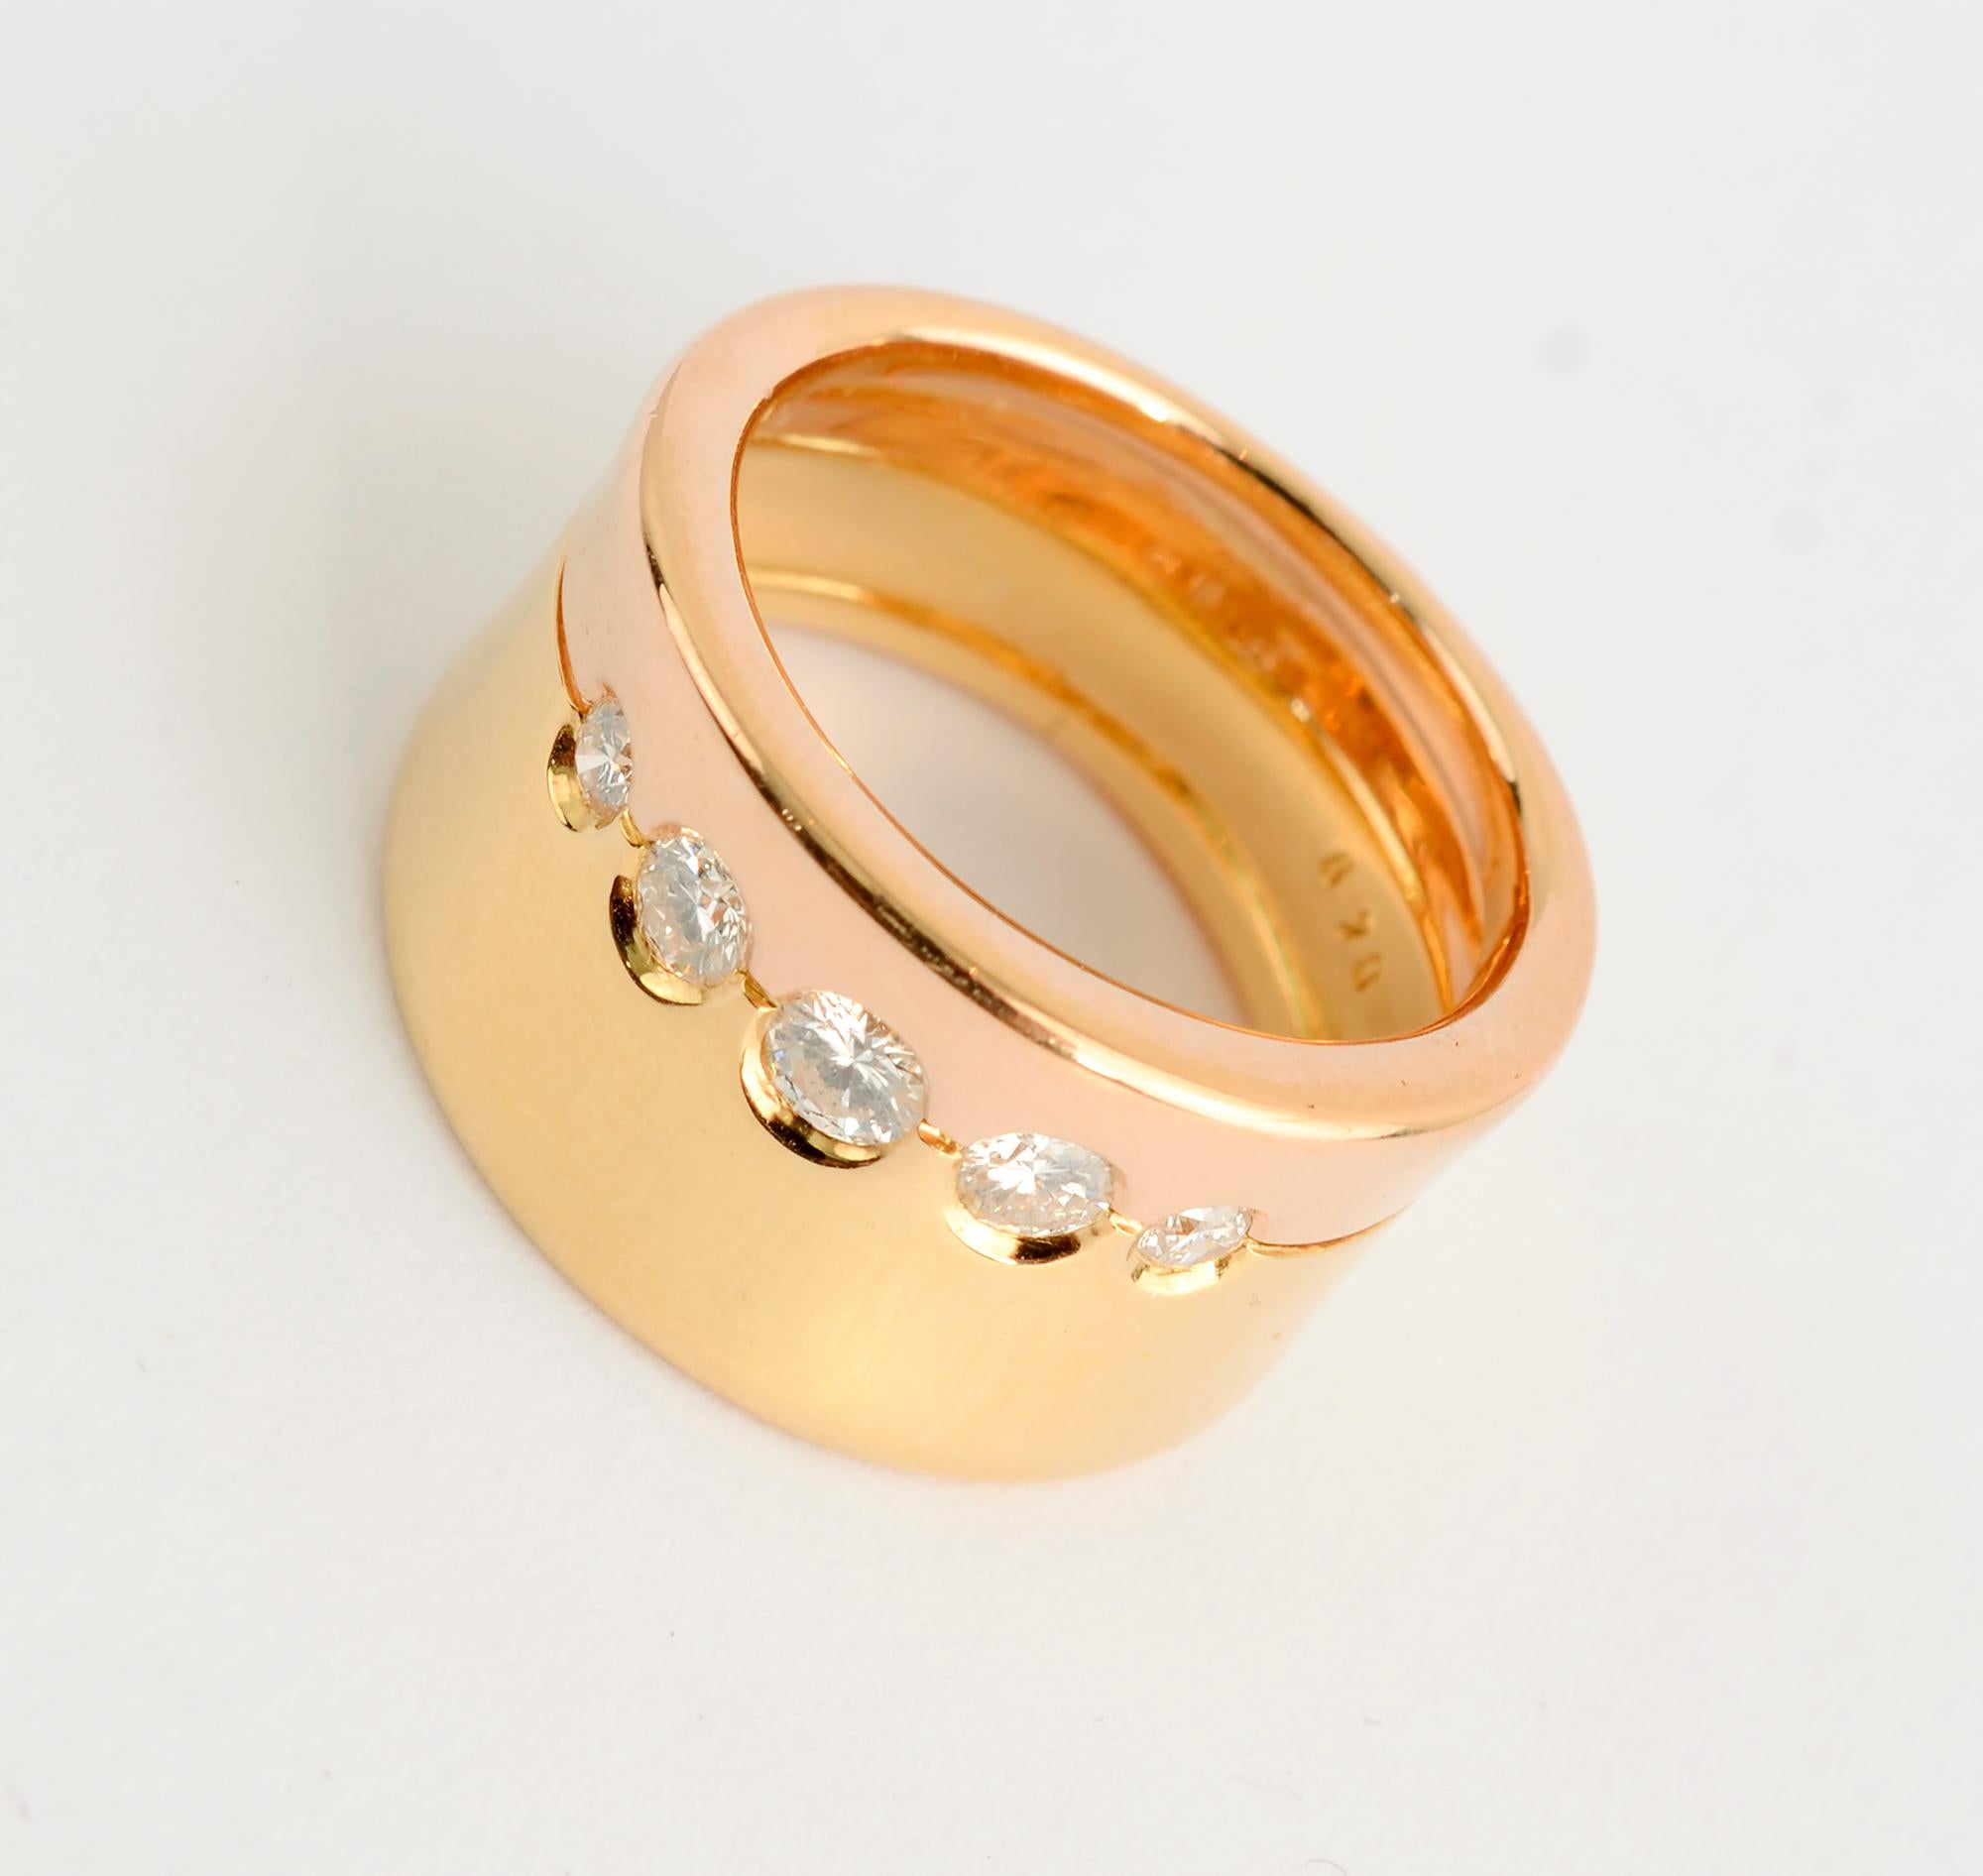 Stylish and unusual yellow and pink gold ring by Gubelin. The yellow portion of the band is wider than the pink. Between them are five graduated size diamonds, the largest of which is .25 carats. The two bands of gold are slightly concave. The ring